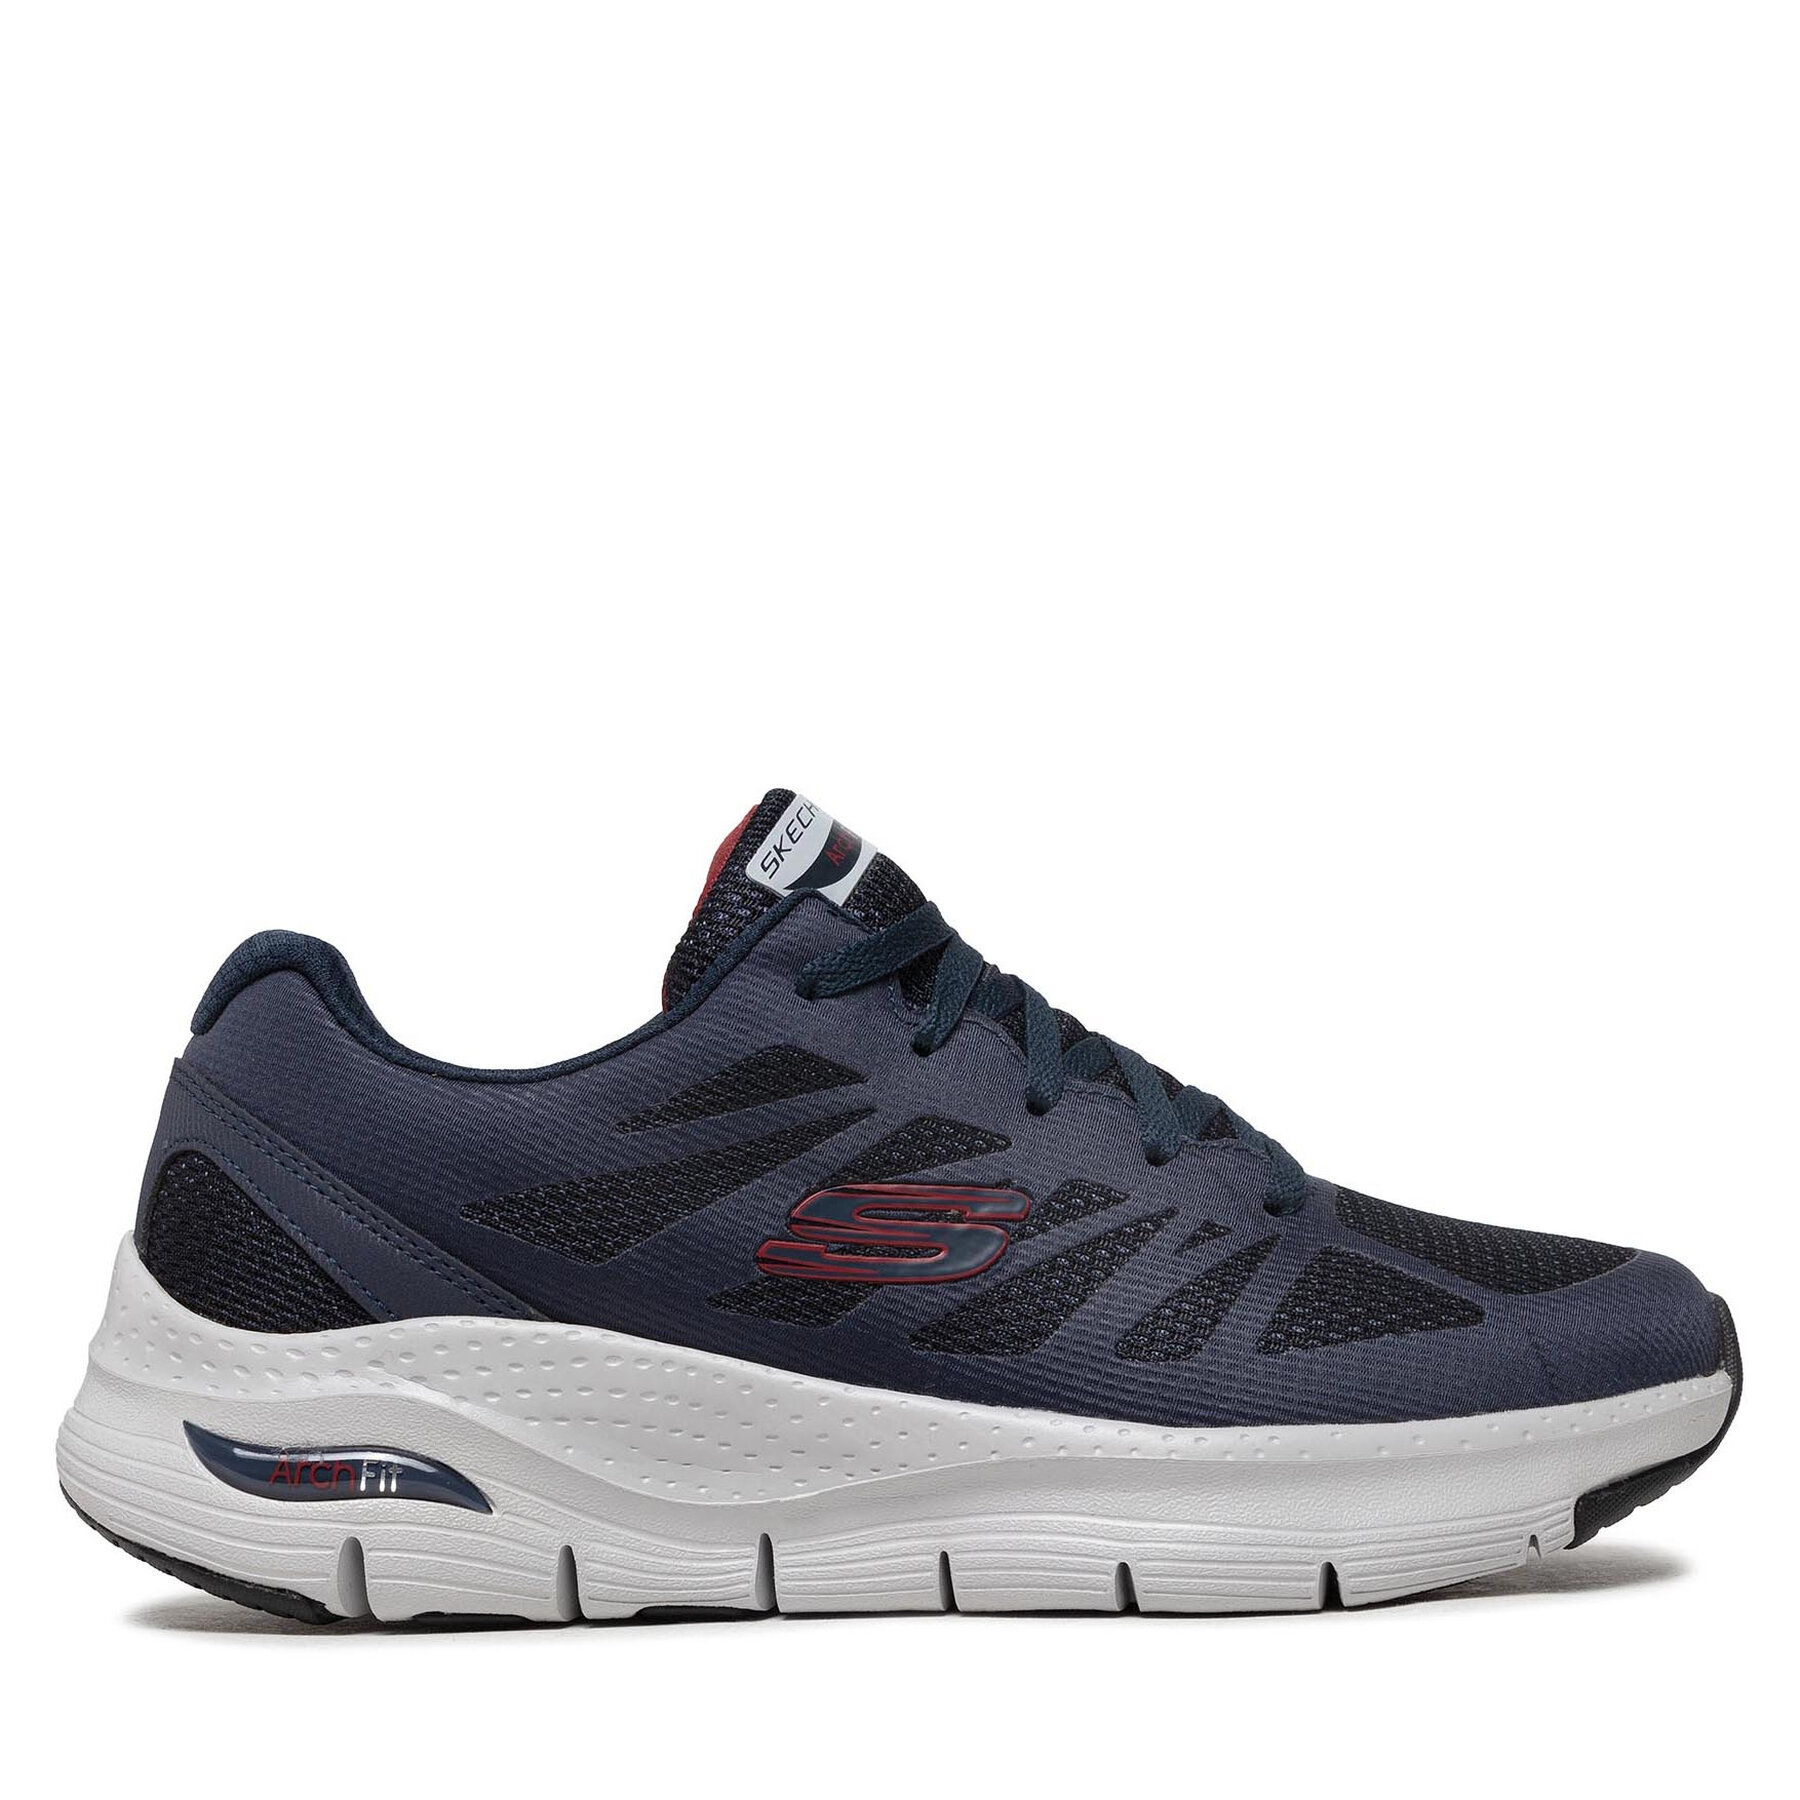 Schuhe Skechers Charge Back 232042/NVRD Navy/Red von Skechers